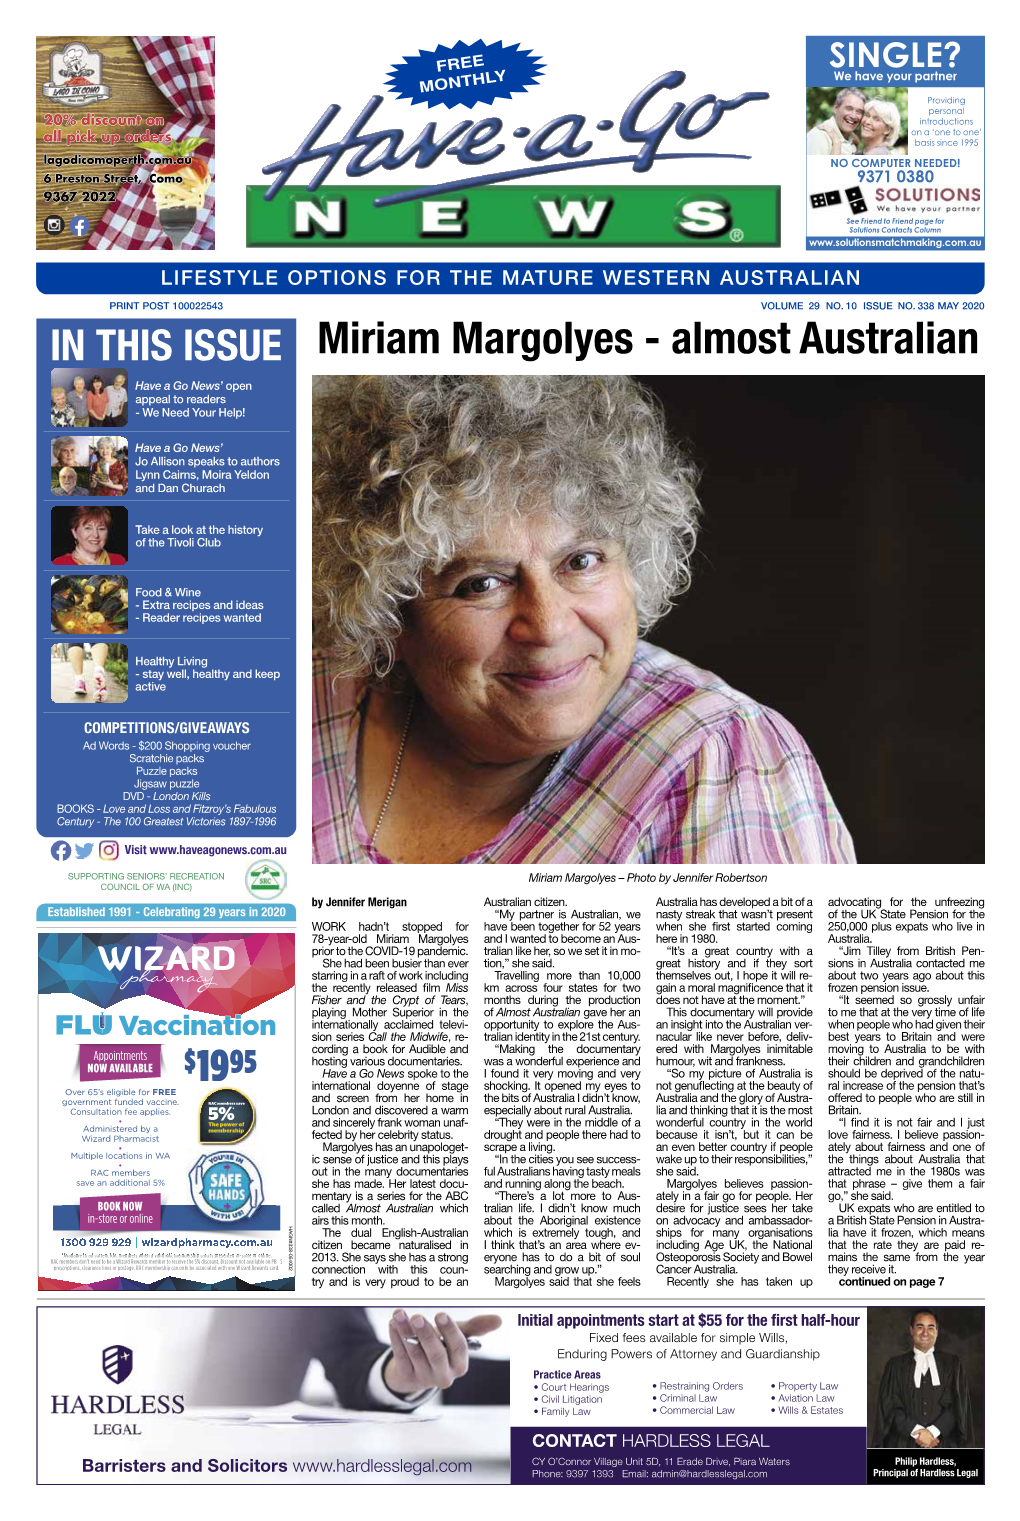 Miriam Margolyes - Almost Australian Have a Go News’ Open Appeal to Readers - We Need Your Help!